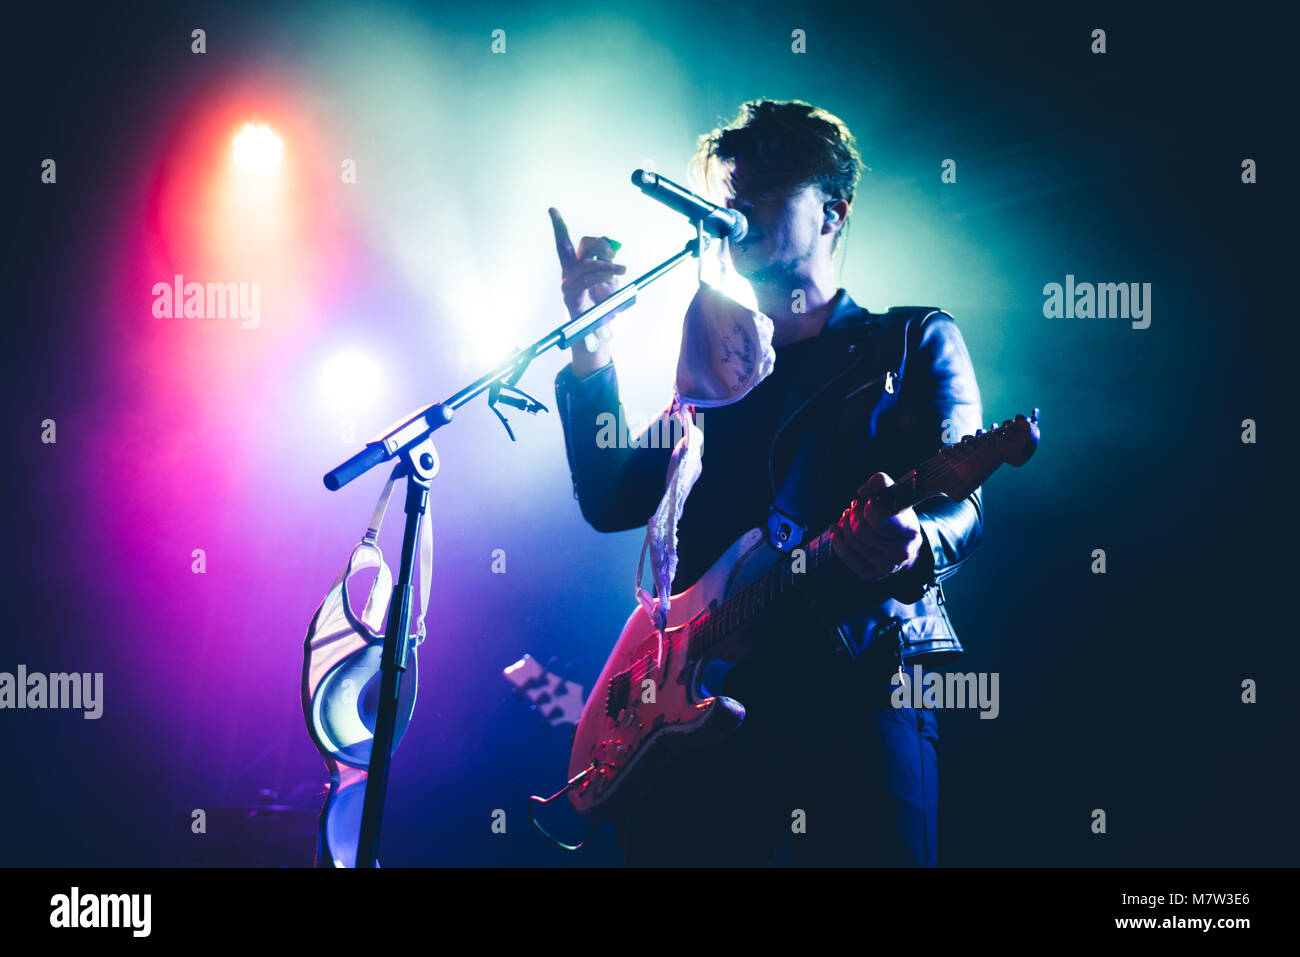 Turin, Italy, 2018 march 12th: The Italian pop band The Colors performing live on stage at the Hiroshima Mon Amour club for their 'Frida Tour' 2018 last concert Photo: Alessandro Bosio/Alamy Live News Stock Photo